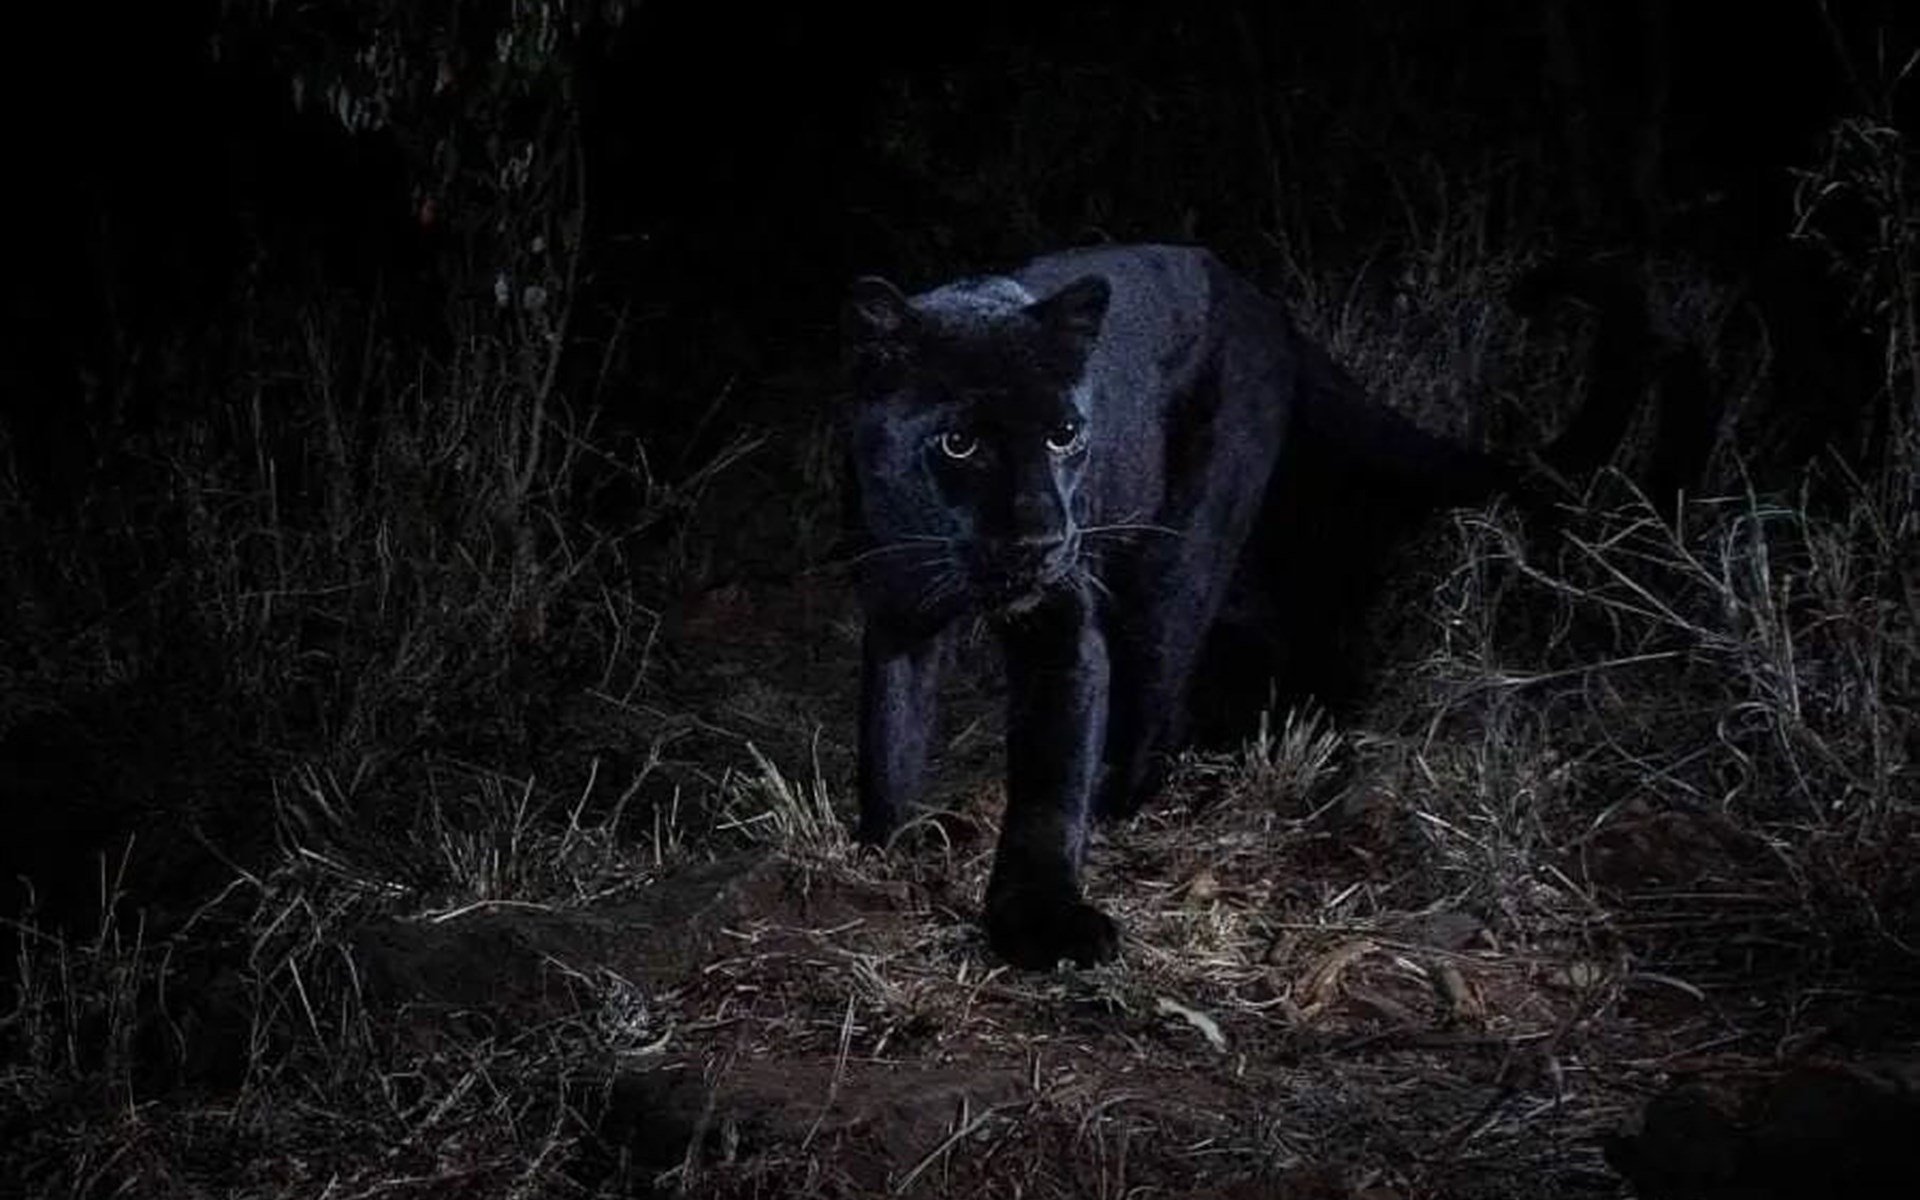 Where to see a Black Leopard in Kenya